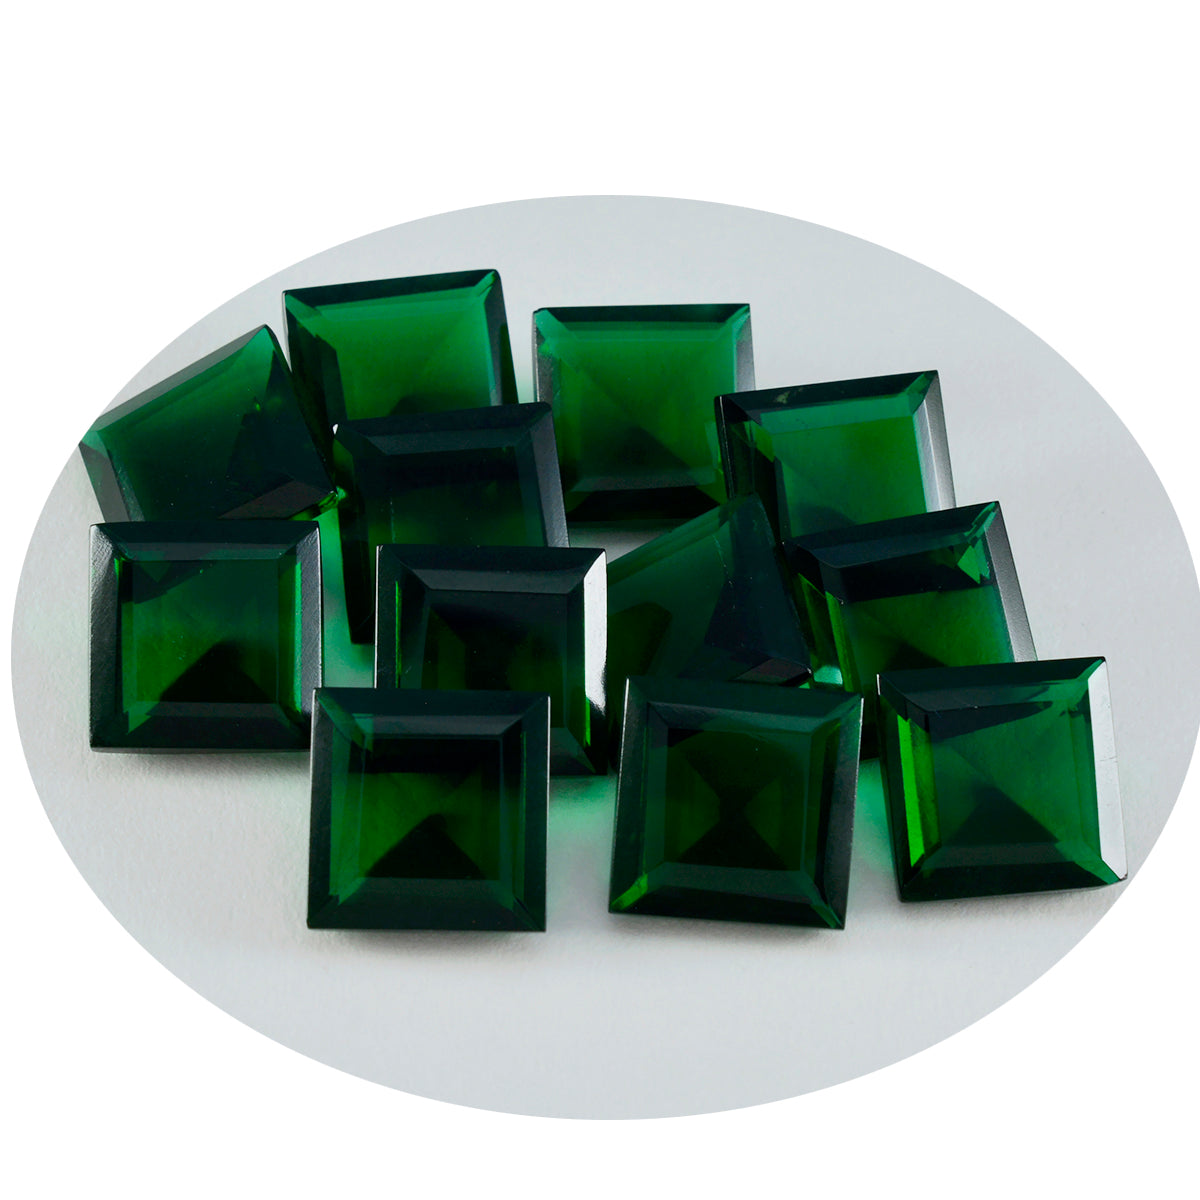 Riyogems 1PC Green Emerald CZ Faceted 12x12 mm Square Shape great Quality Loose Gems